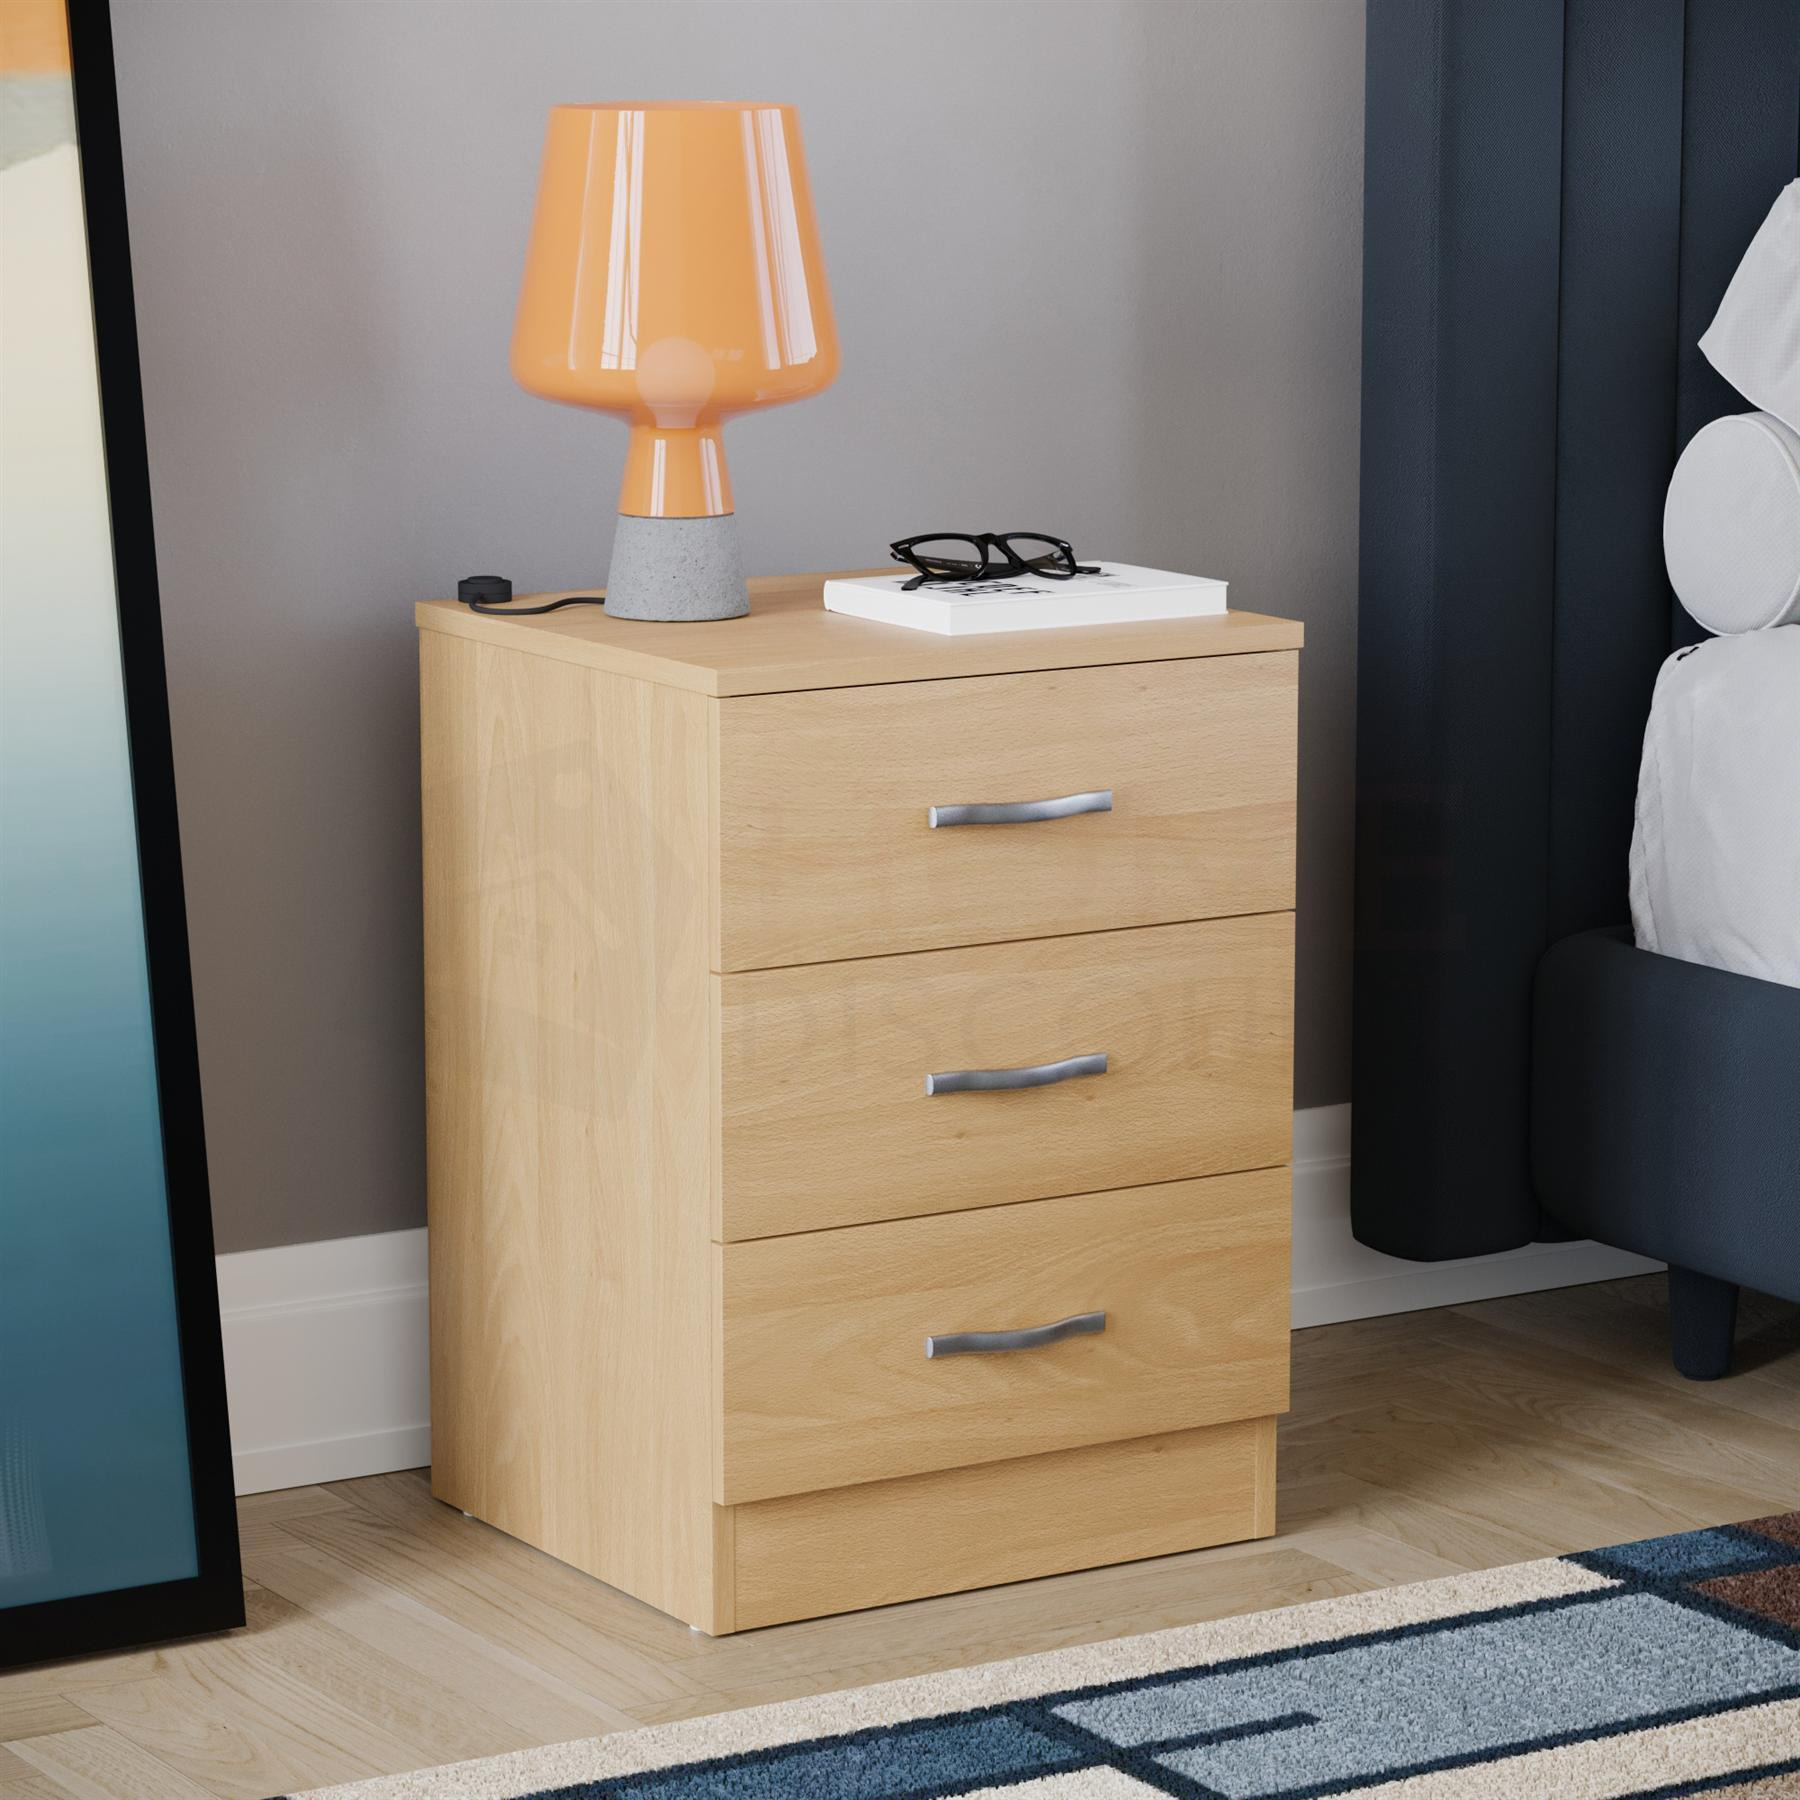 Vida Designs Riano 3 Drawer Bedside Cabinet Chest of Drawers Bedroom Furniture - image 1